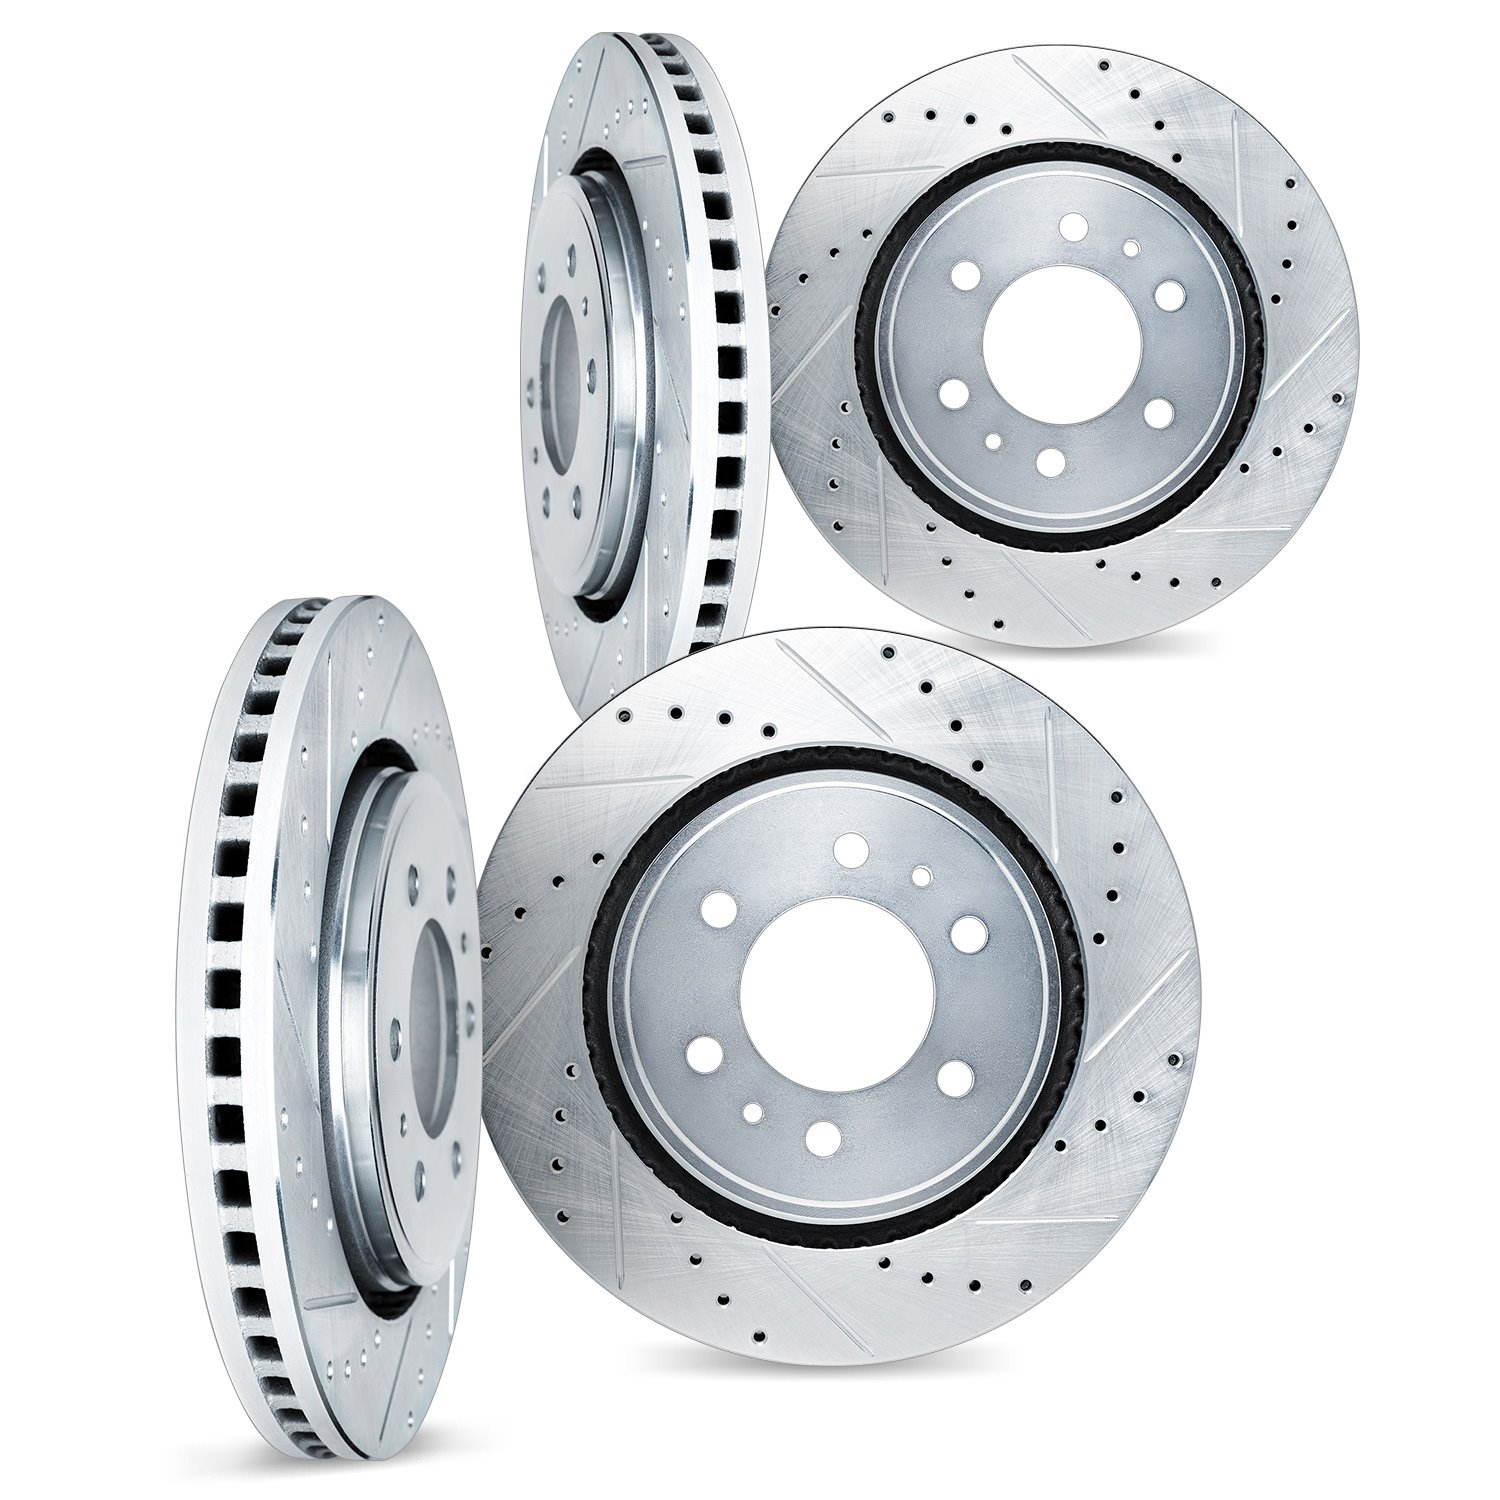 7004-68009 Drilled/Slotted Brake Rotors [Silver], Fits Select Infiniti/Nissan, Position: Front and Rear